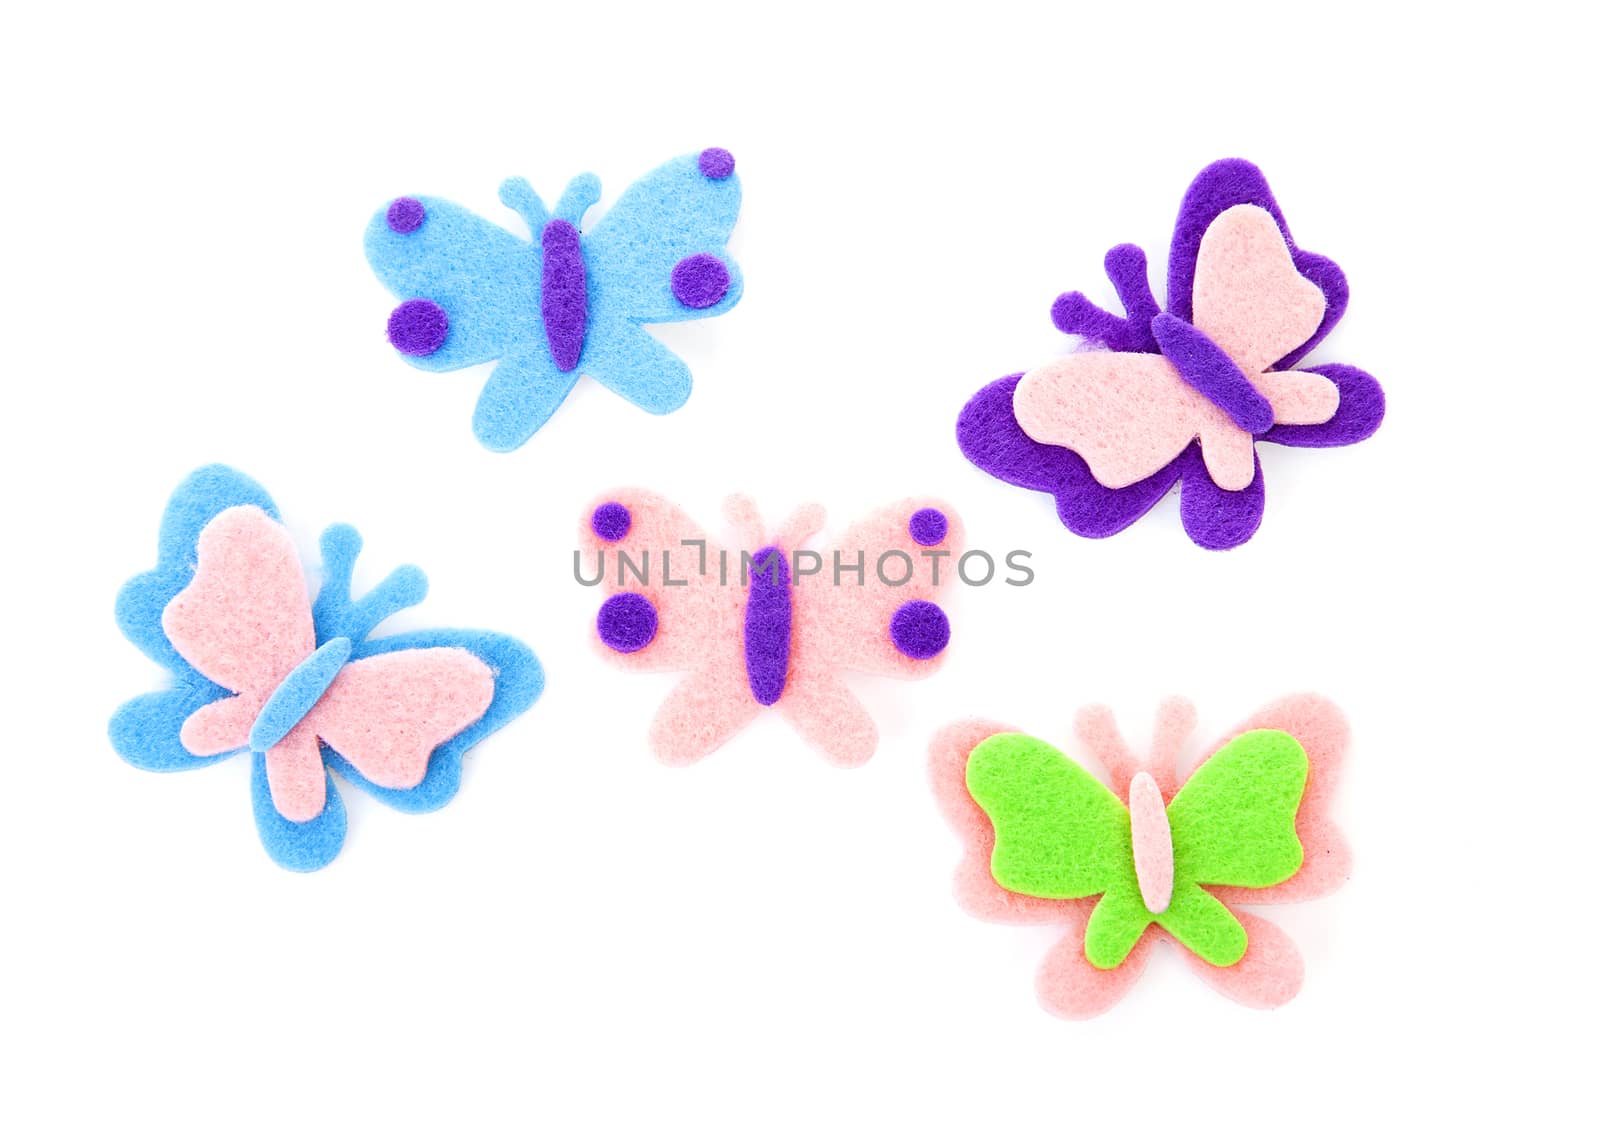 Five butterfly made of felt over white background